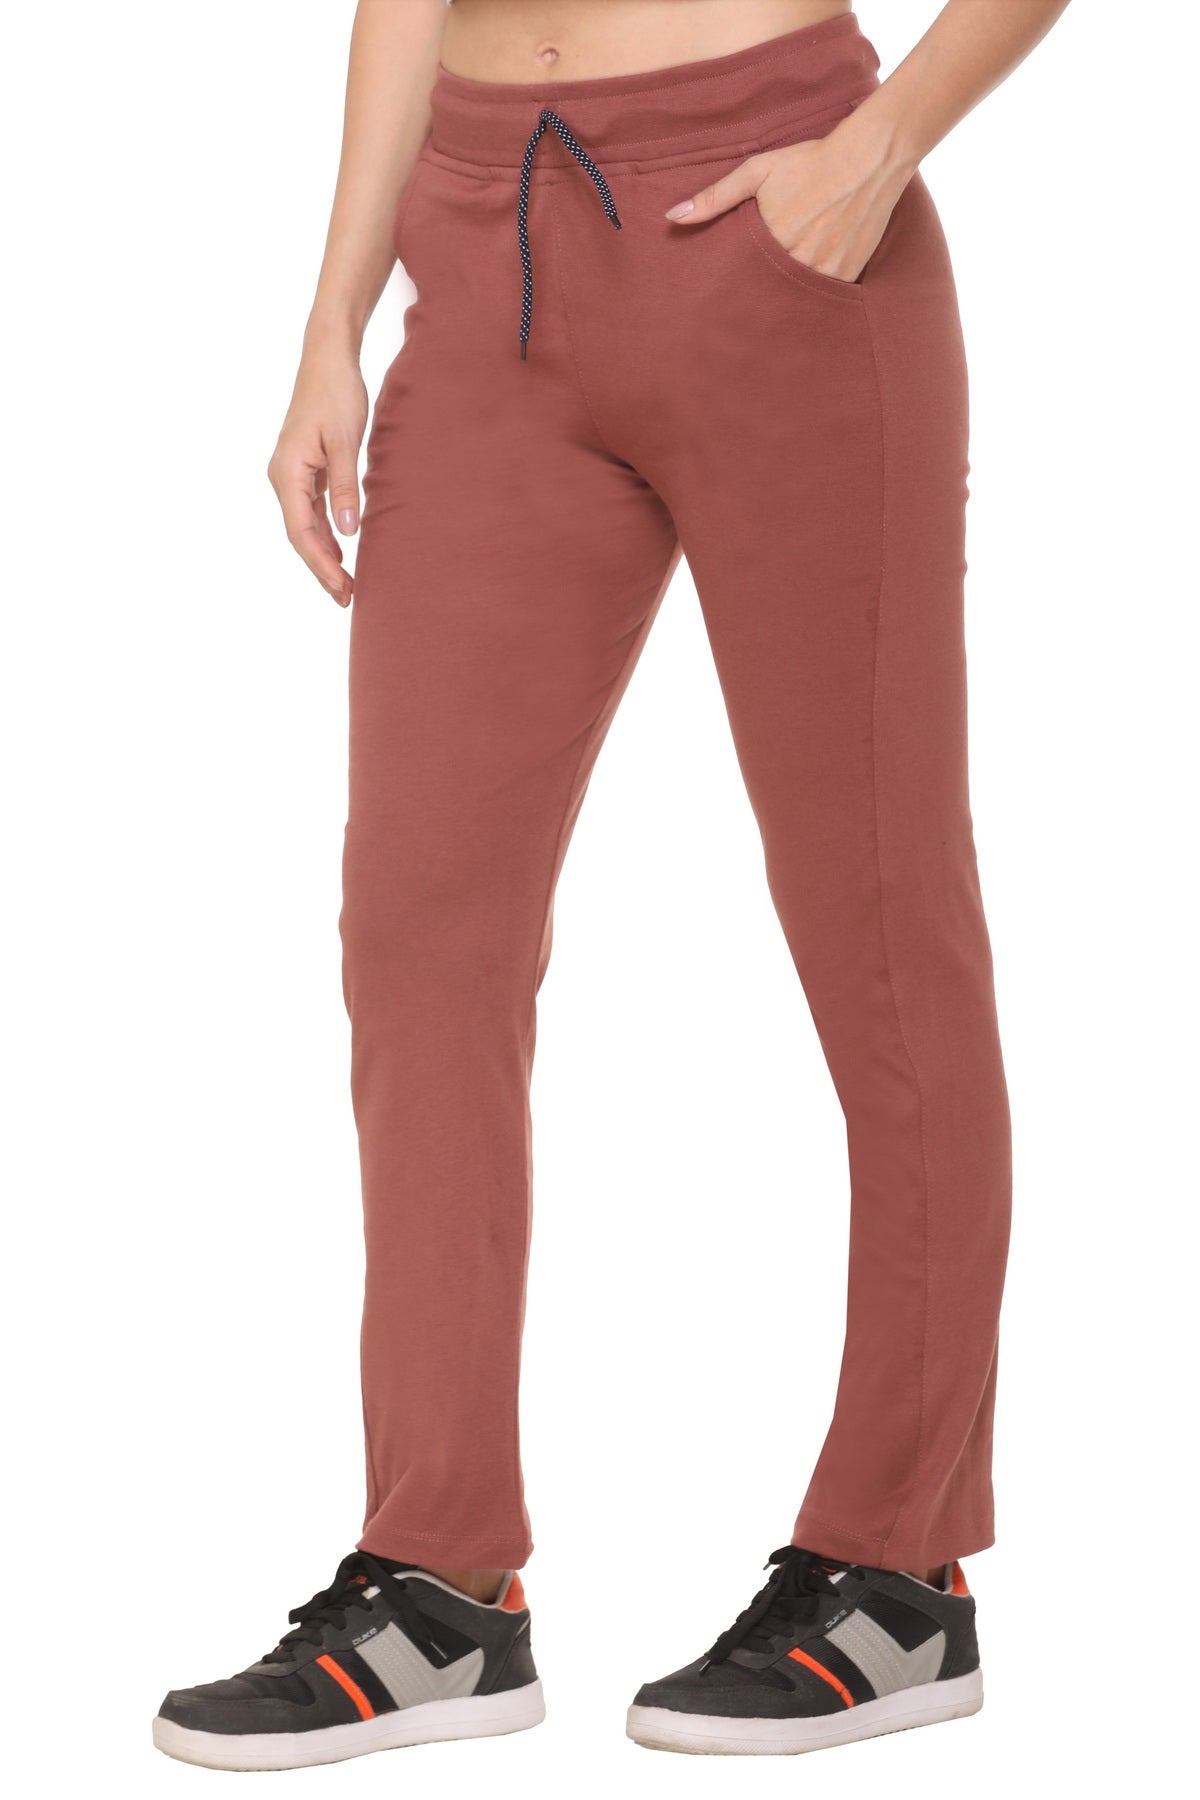 Stylish Track Pants Cotton Lycra Track Pants For Women Online In India